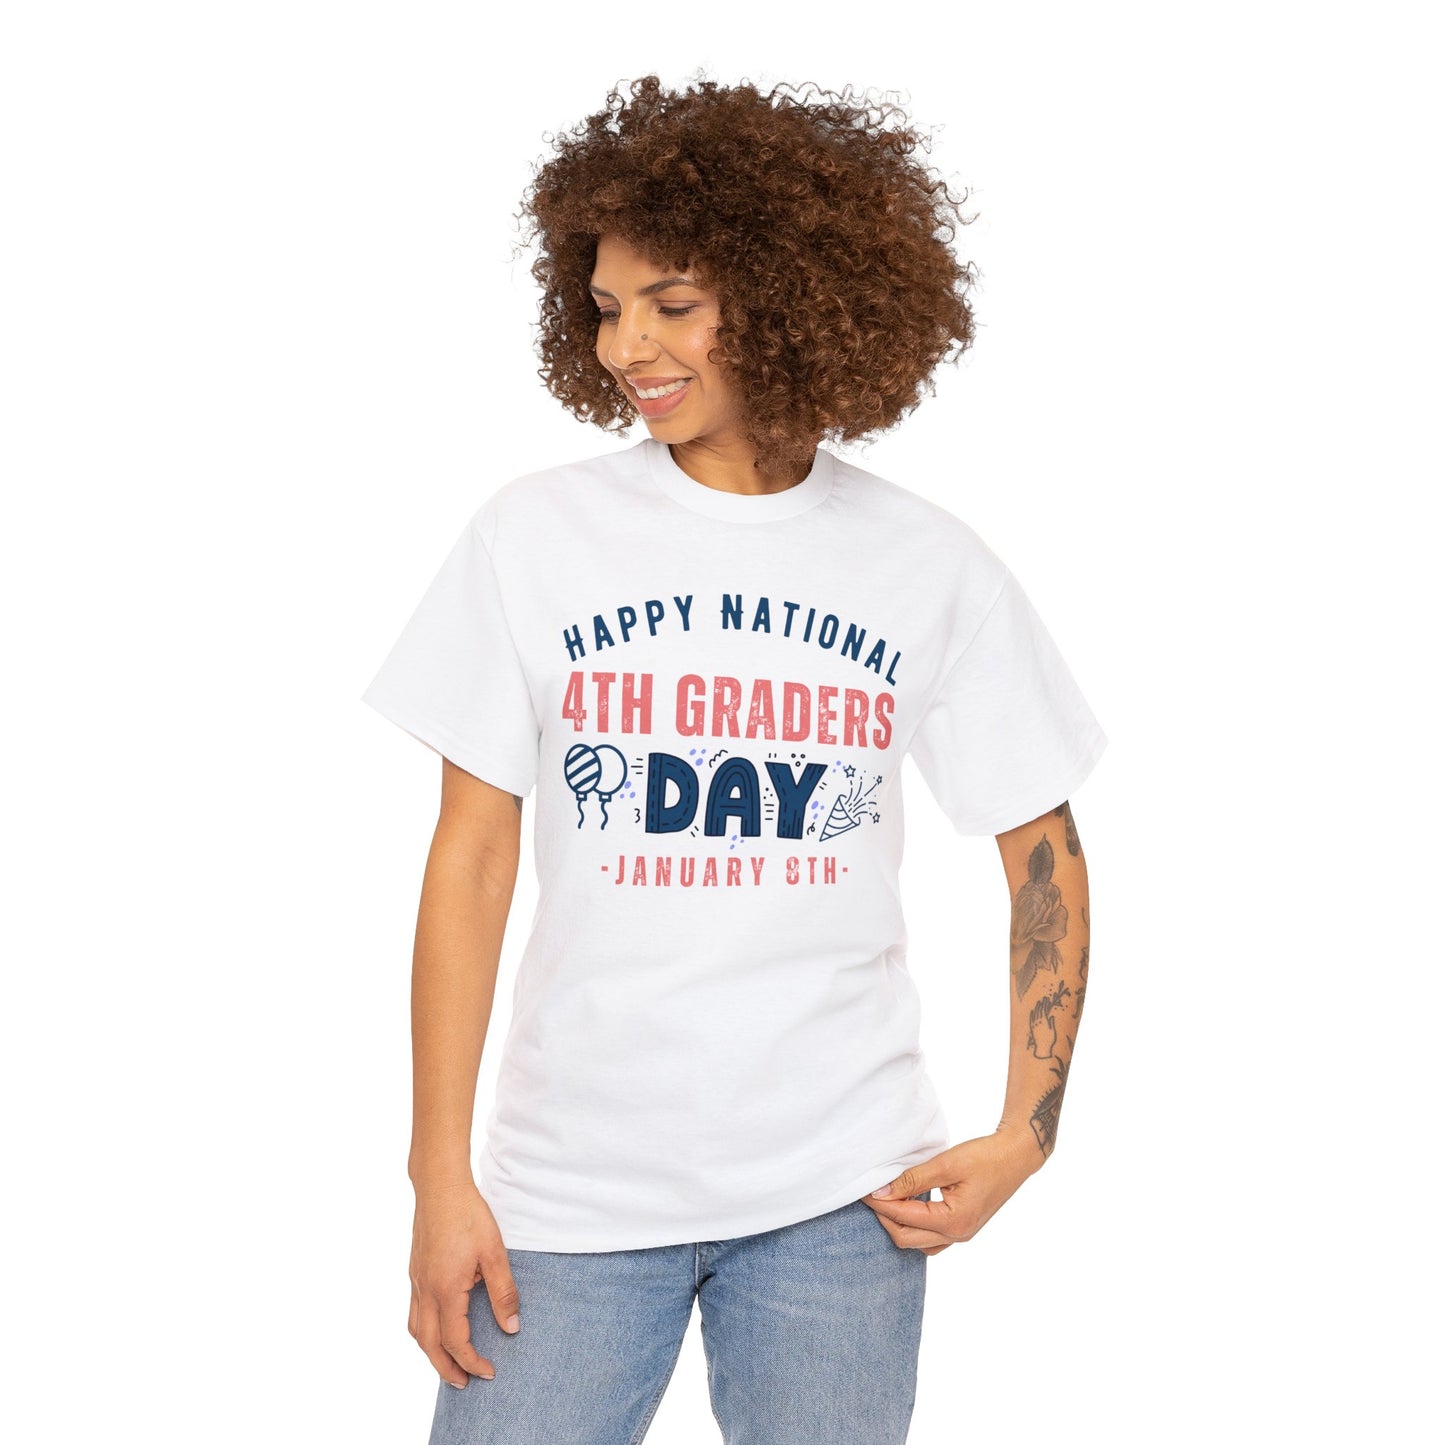 4th Graders Day January 8th Happy National Student Education T-Shirt | Unisex Tee Shirt